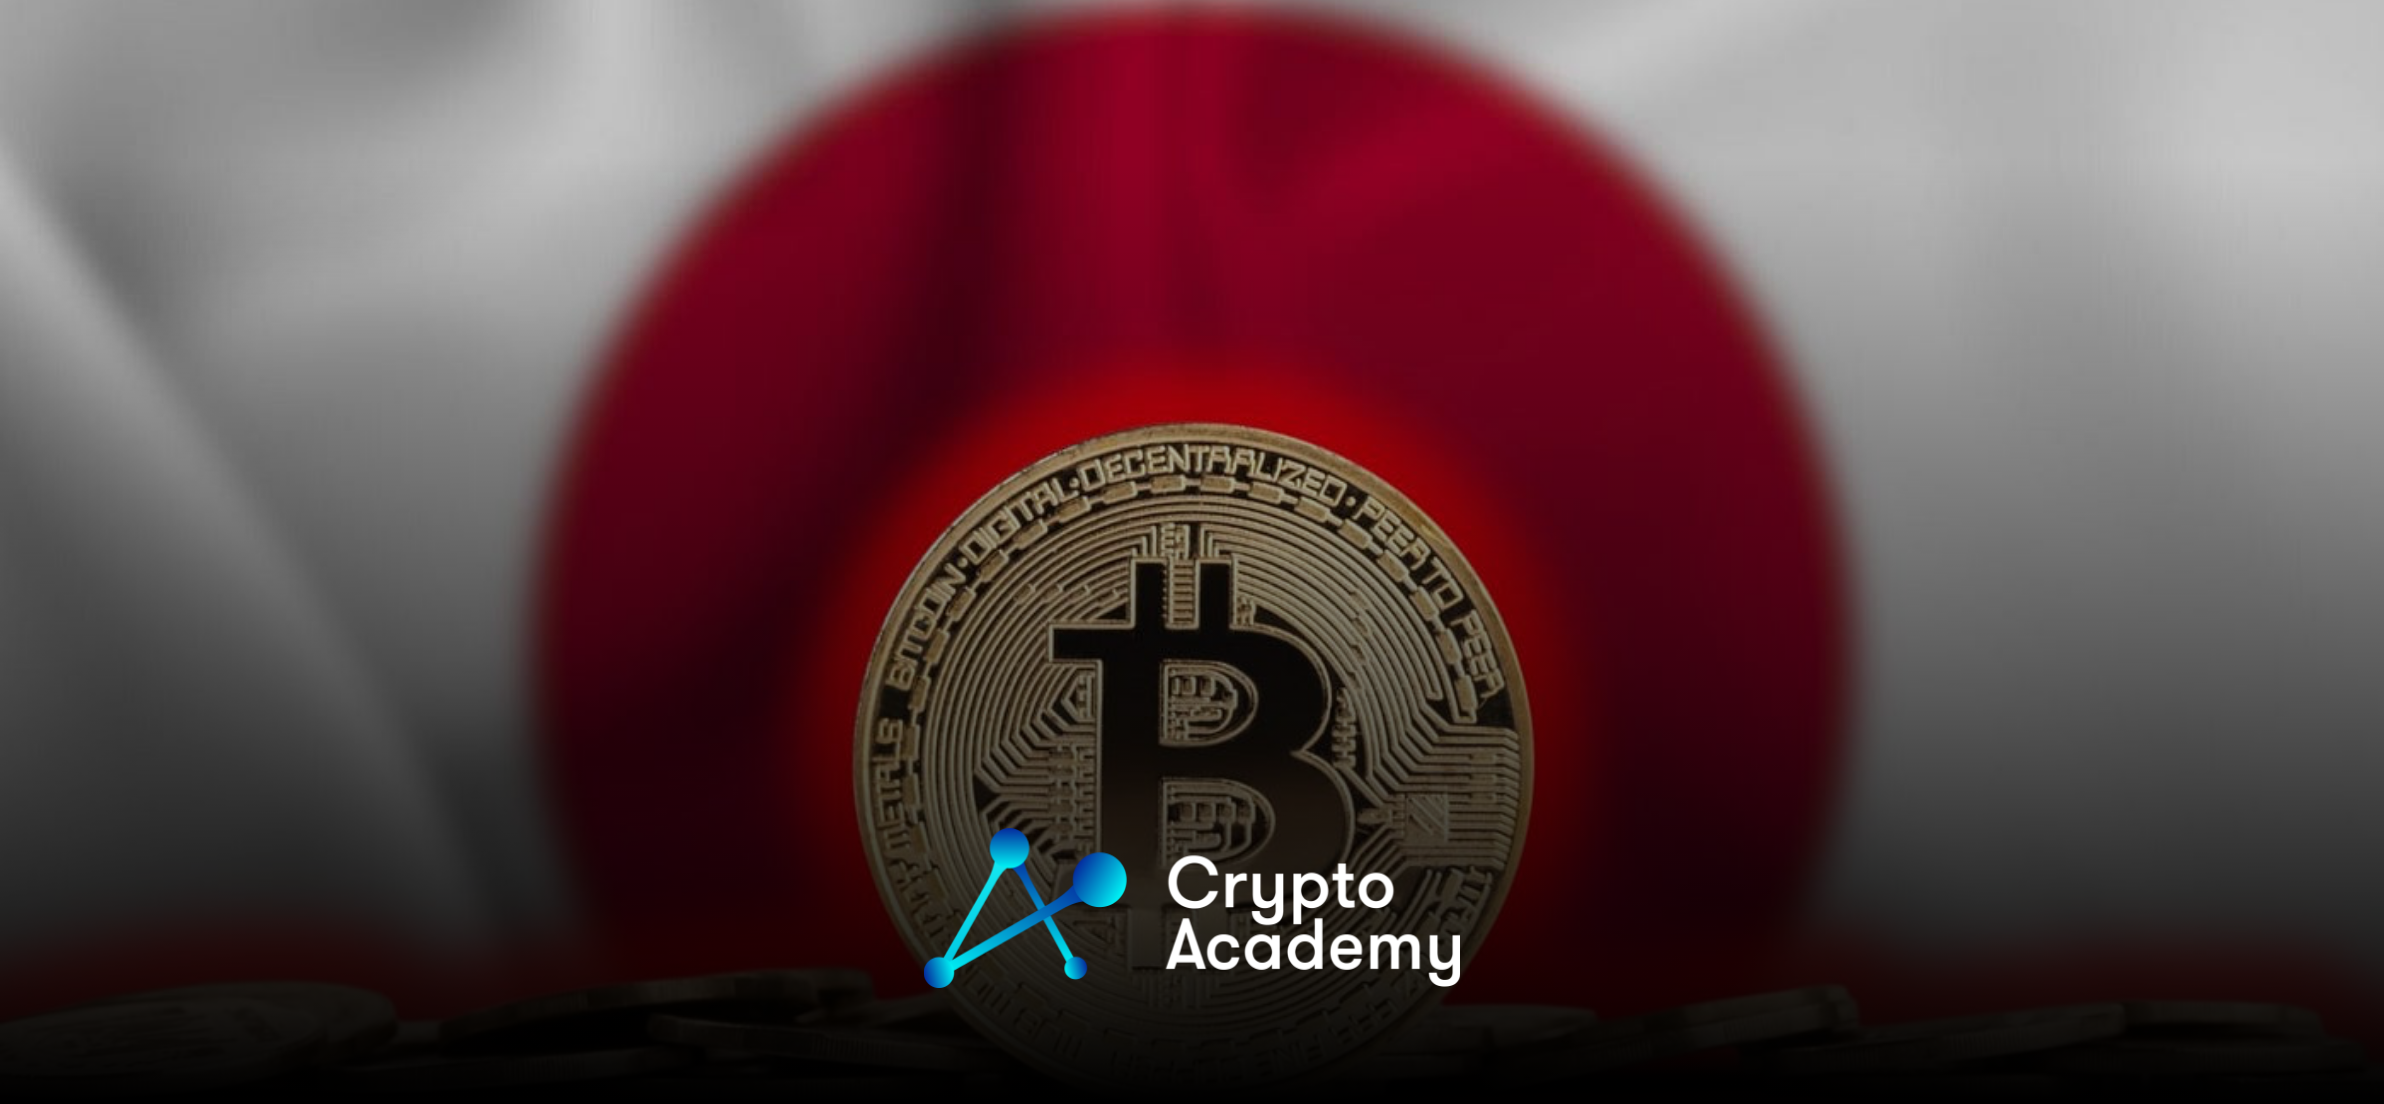 Japan Embraces Crypto for Startups Funding